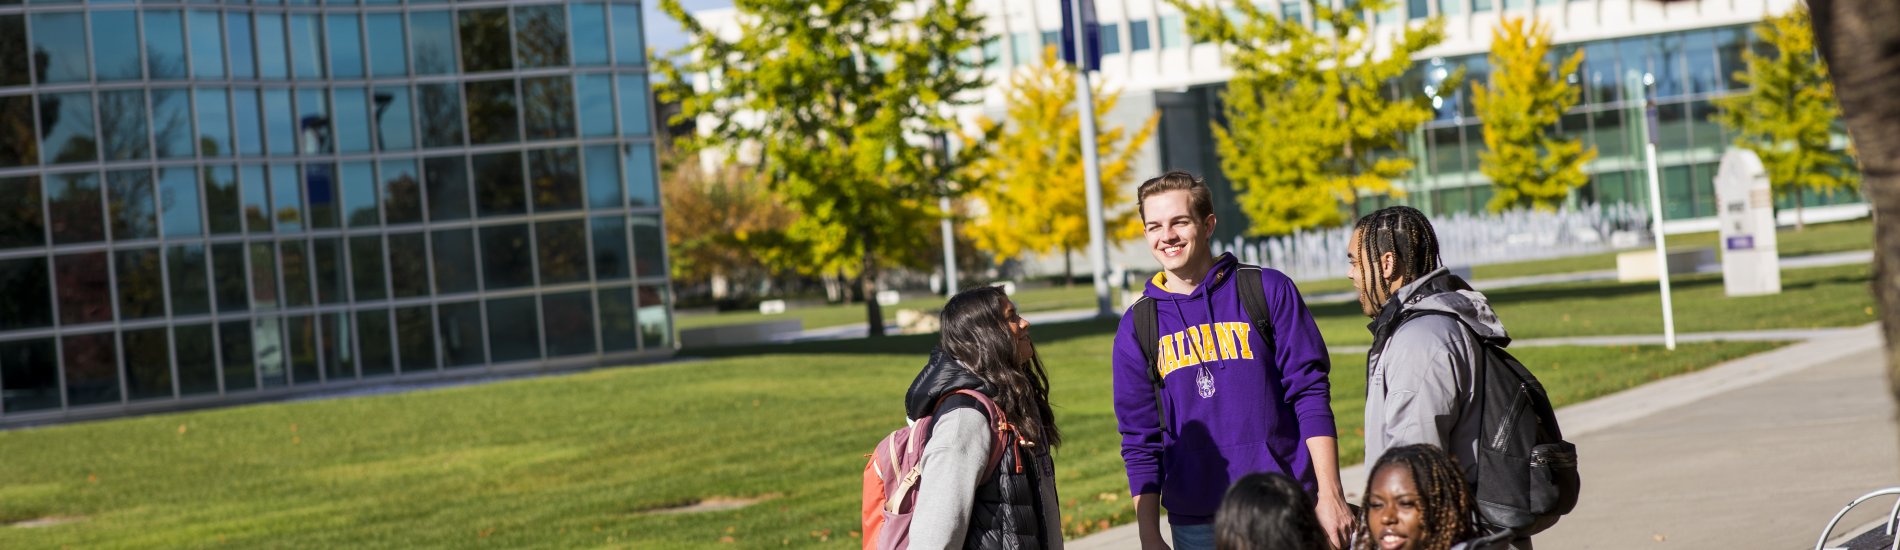 Three standing UAlbany students and two seated outdoors on campus with fall foliage on nearby trees